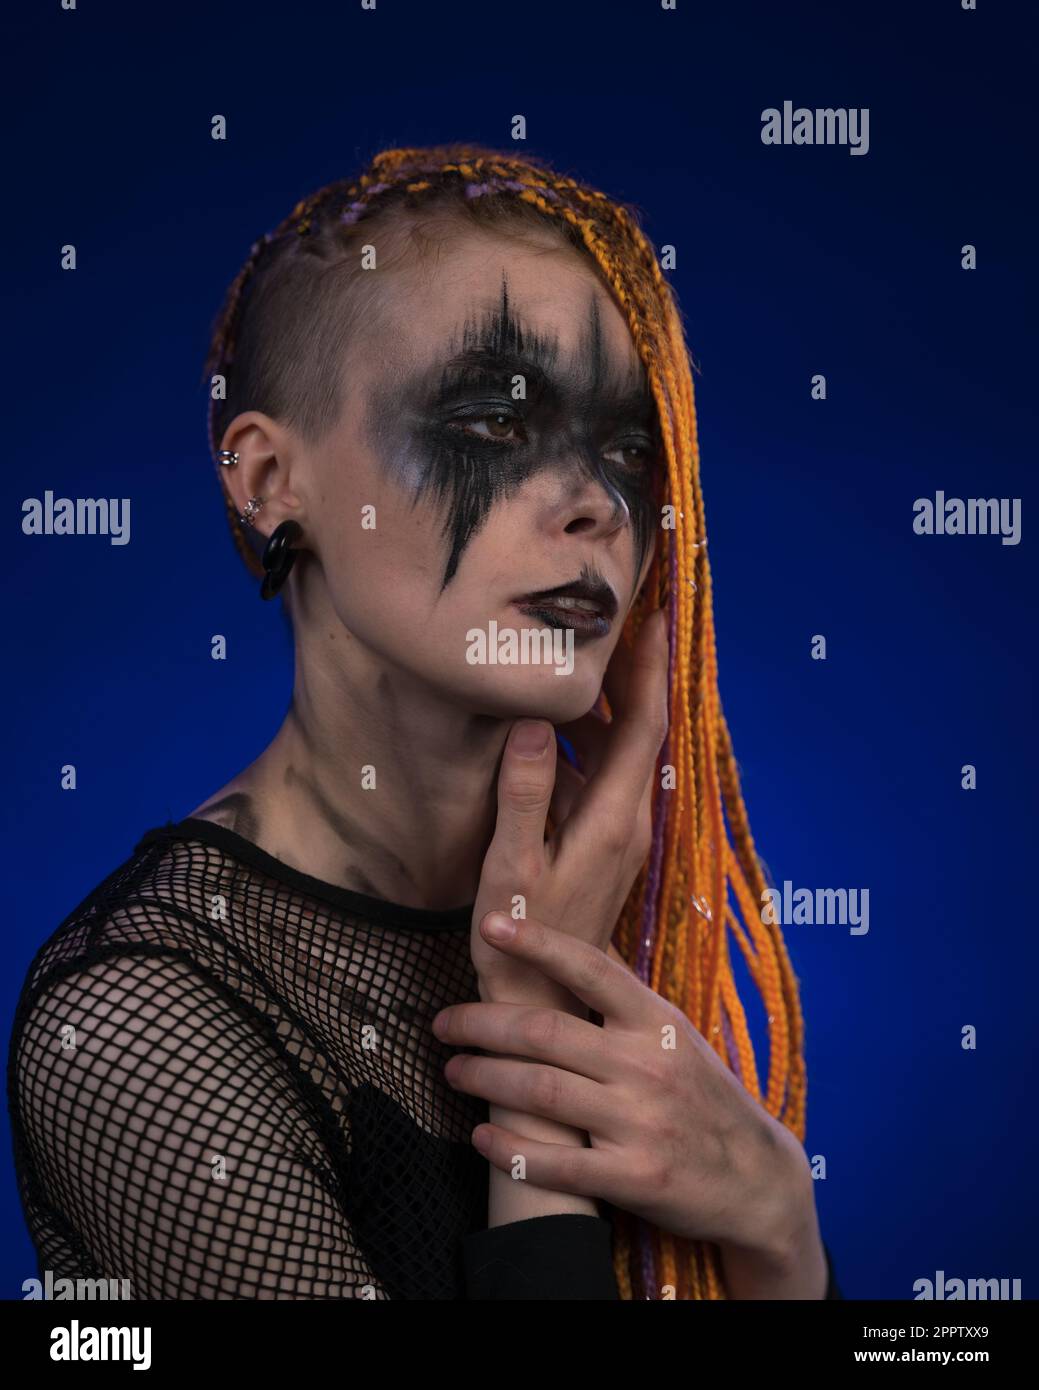 Premium Photo  Portrait of young female with horror stage makeup and  colored without dangerous dreadlocks hairstyle